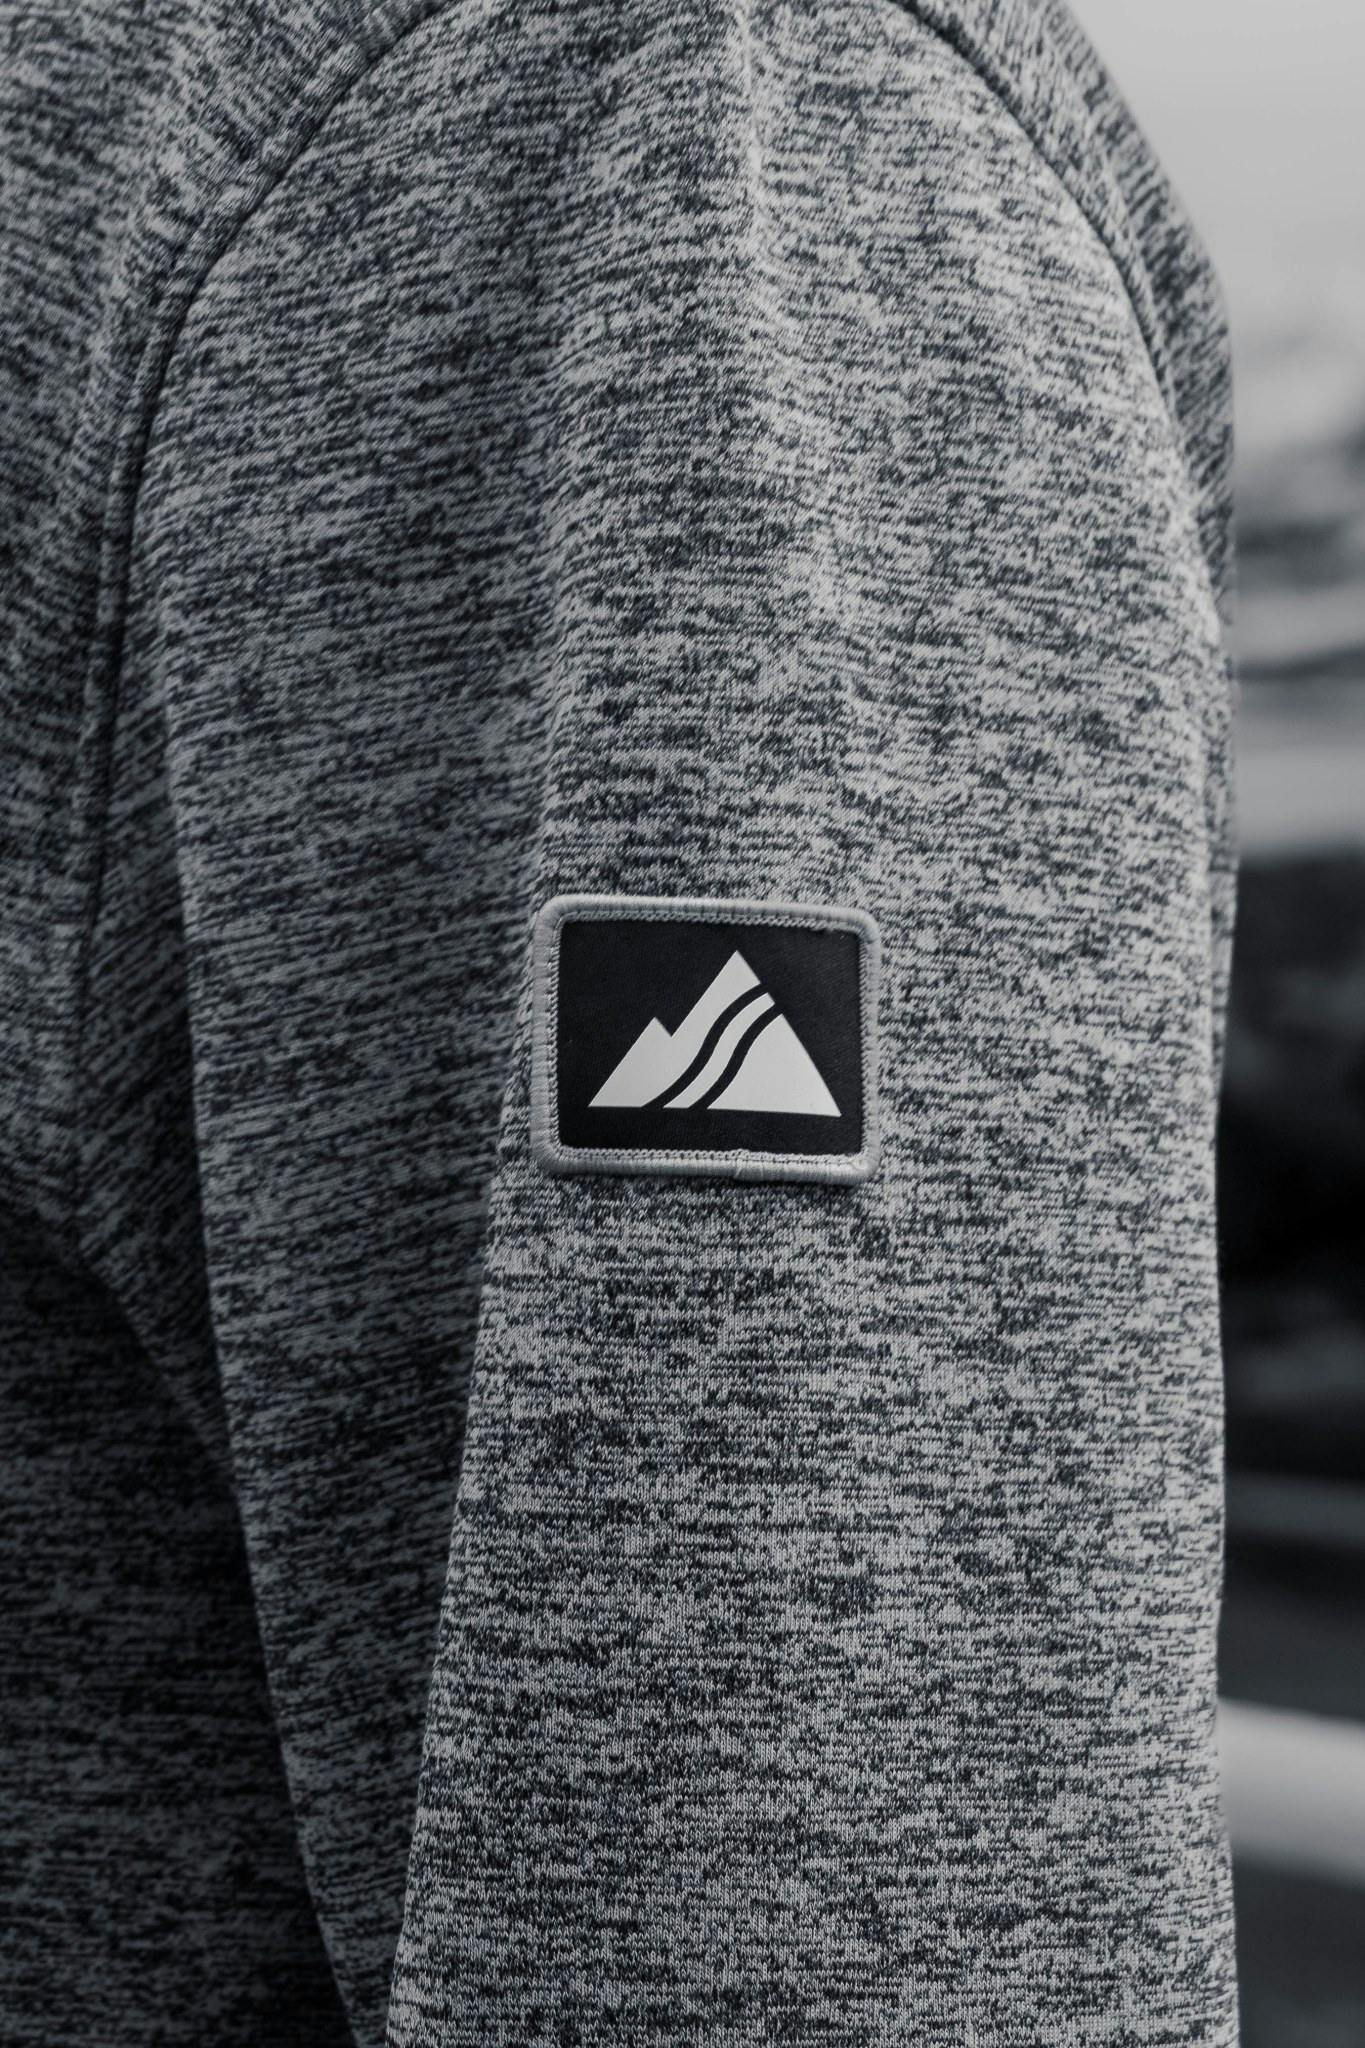 A sweater with the Strafe outerwear logo on the left arm